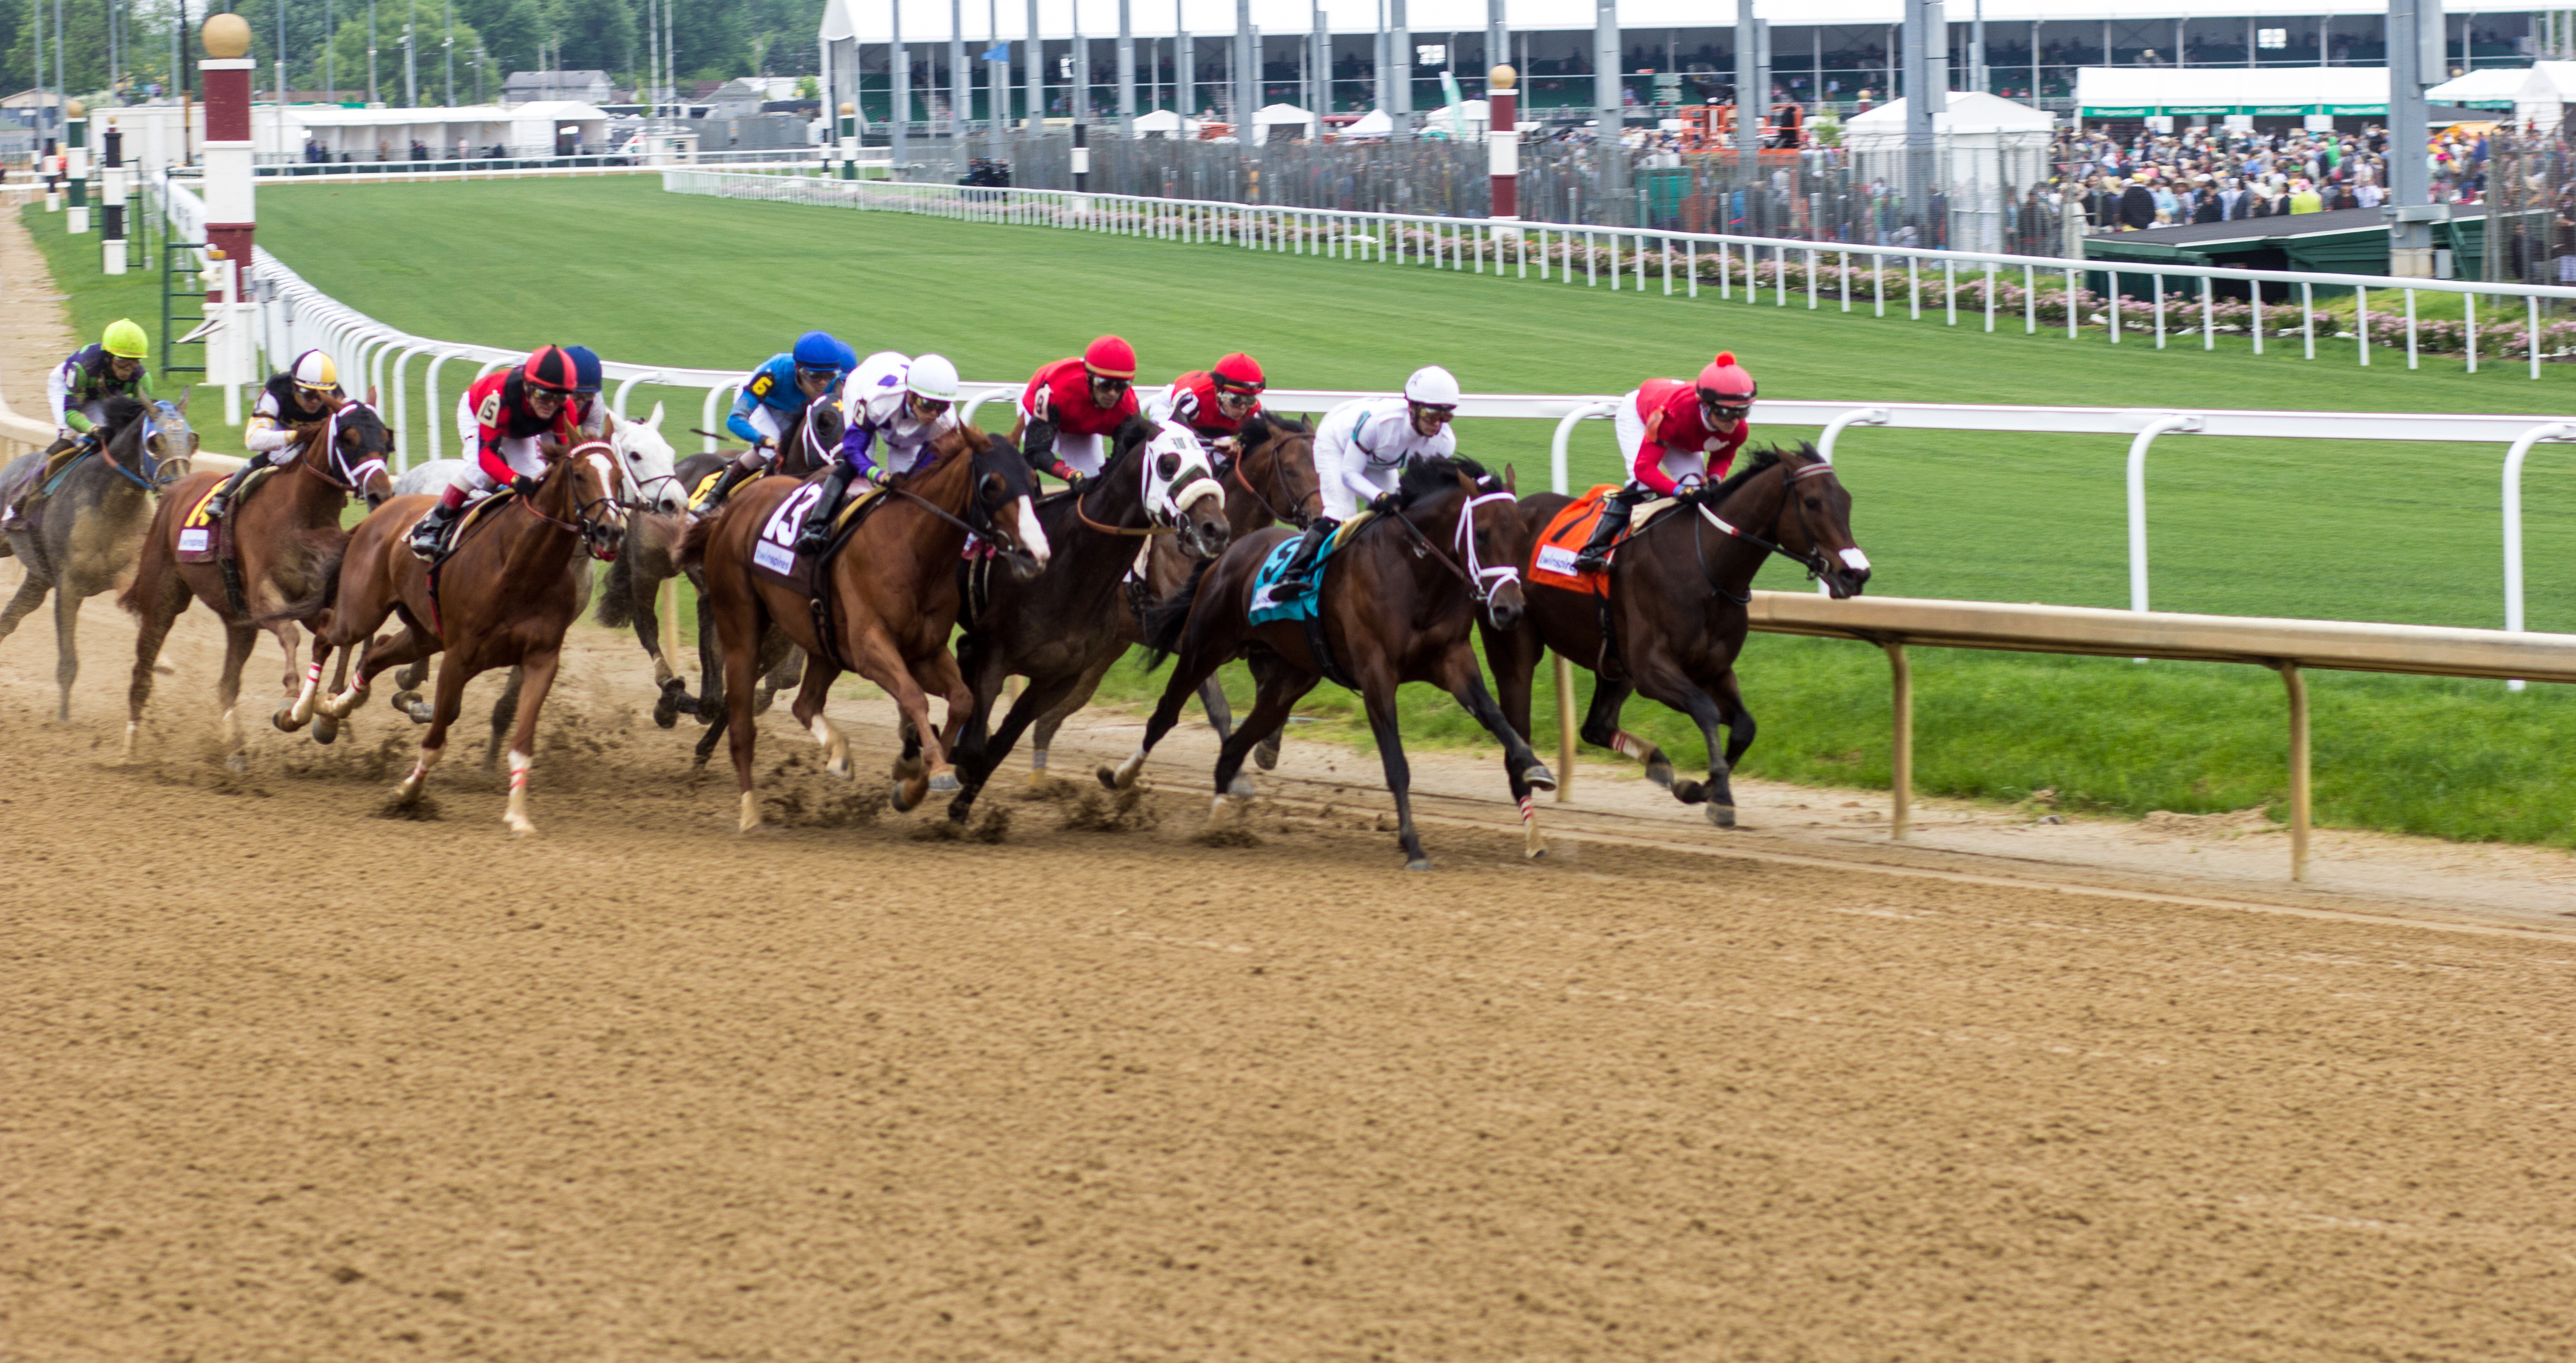 Racing at the Kentucky Derby